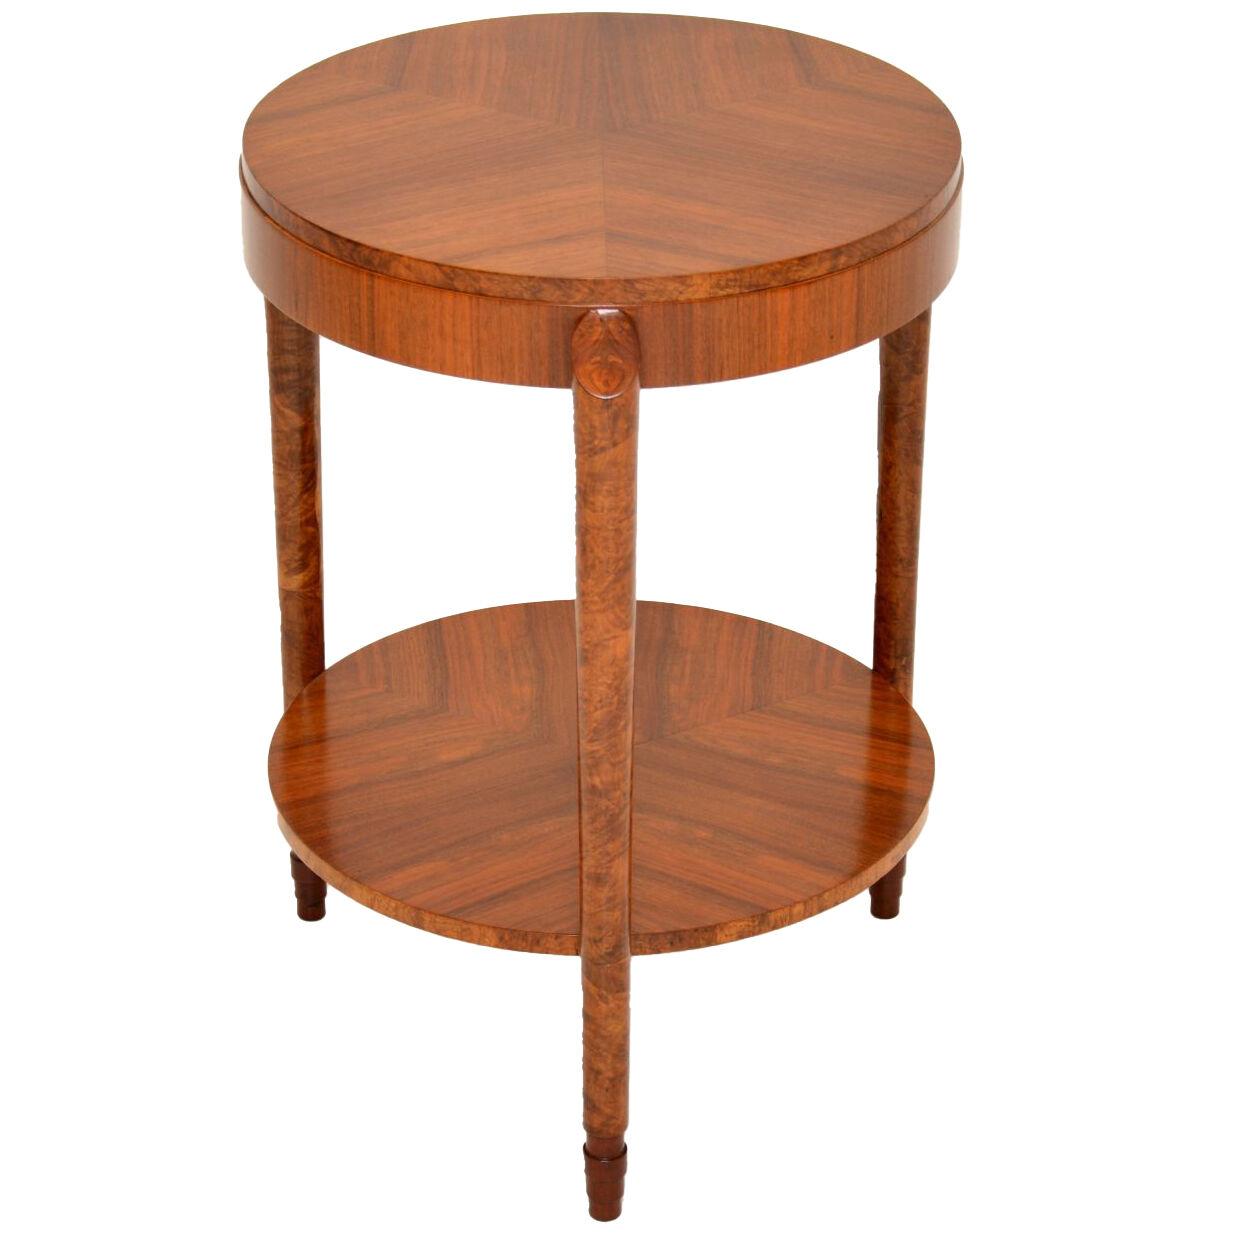 1930's Art Deco Walnut Occasional Side Table